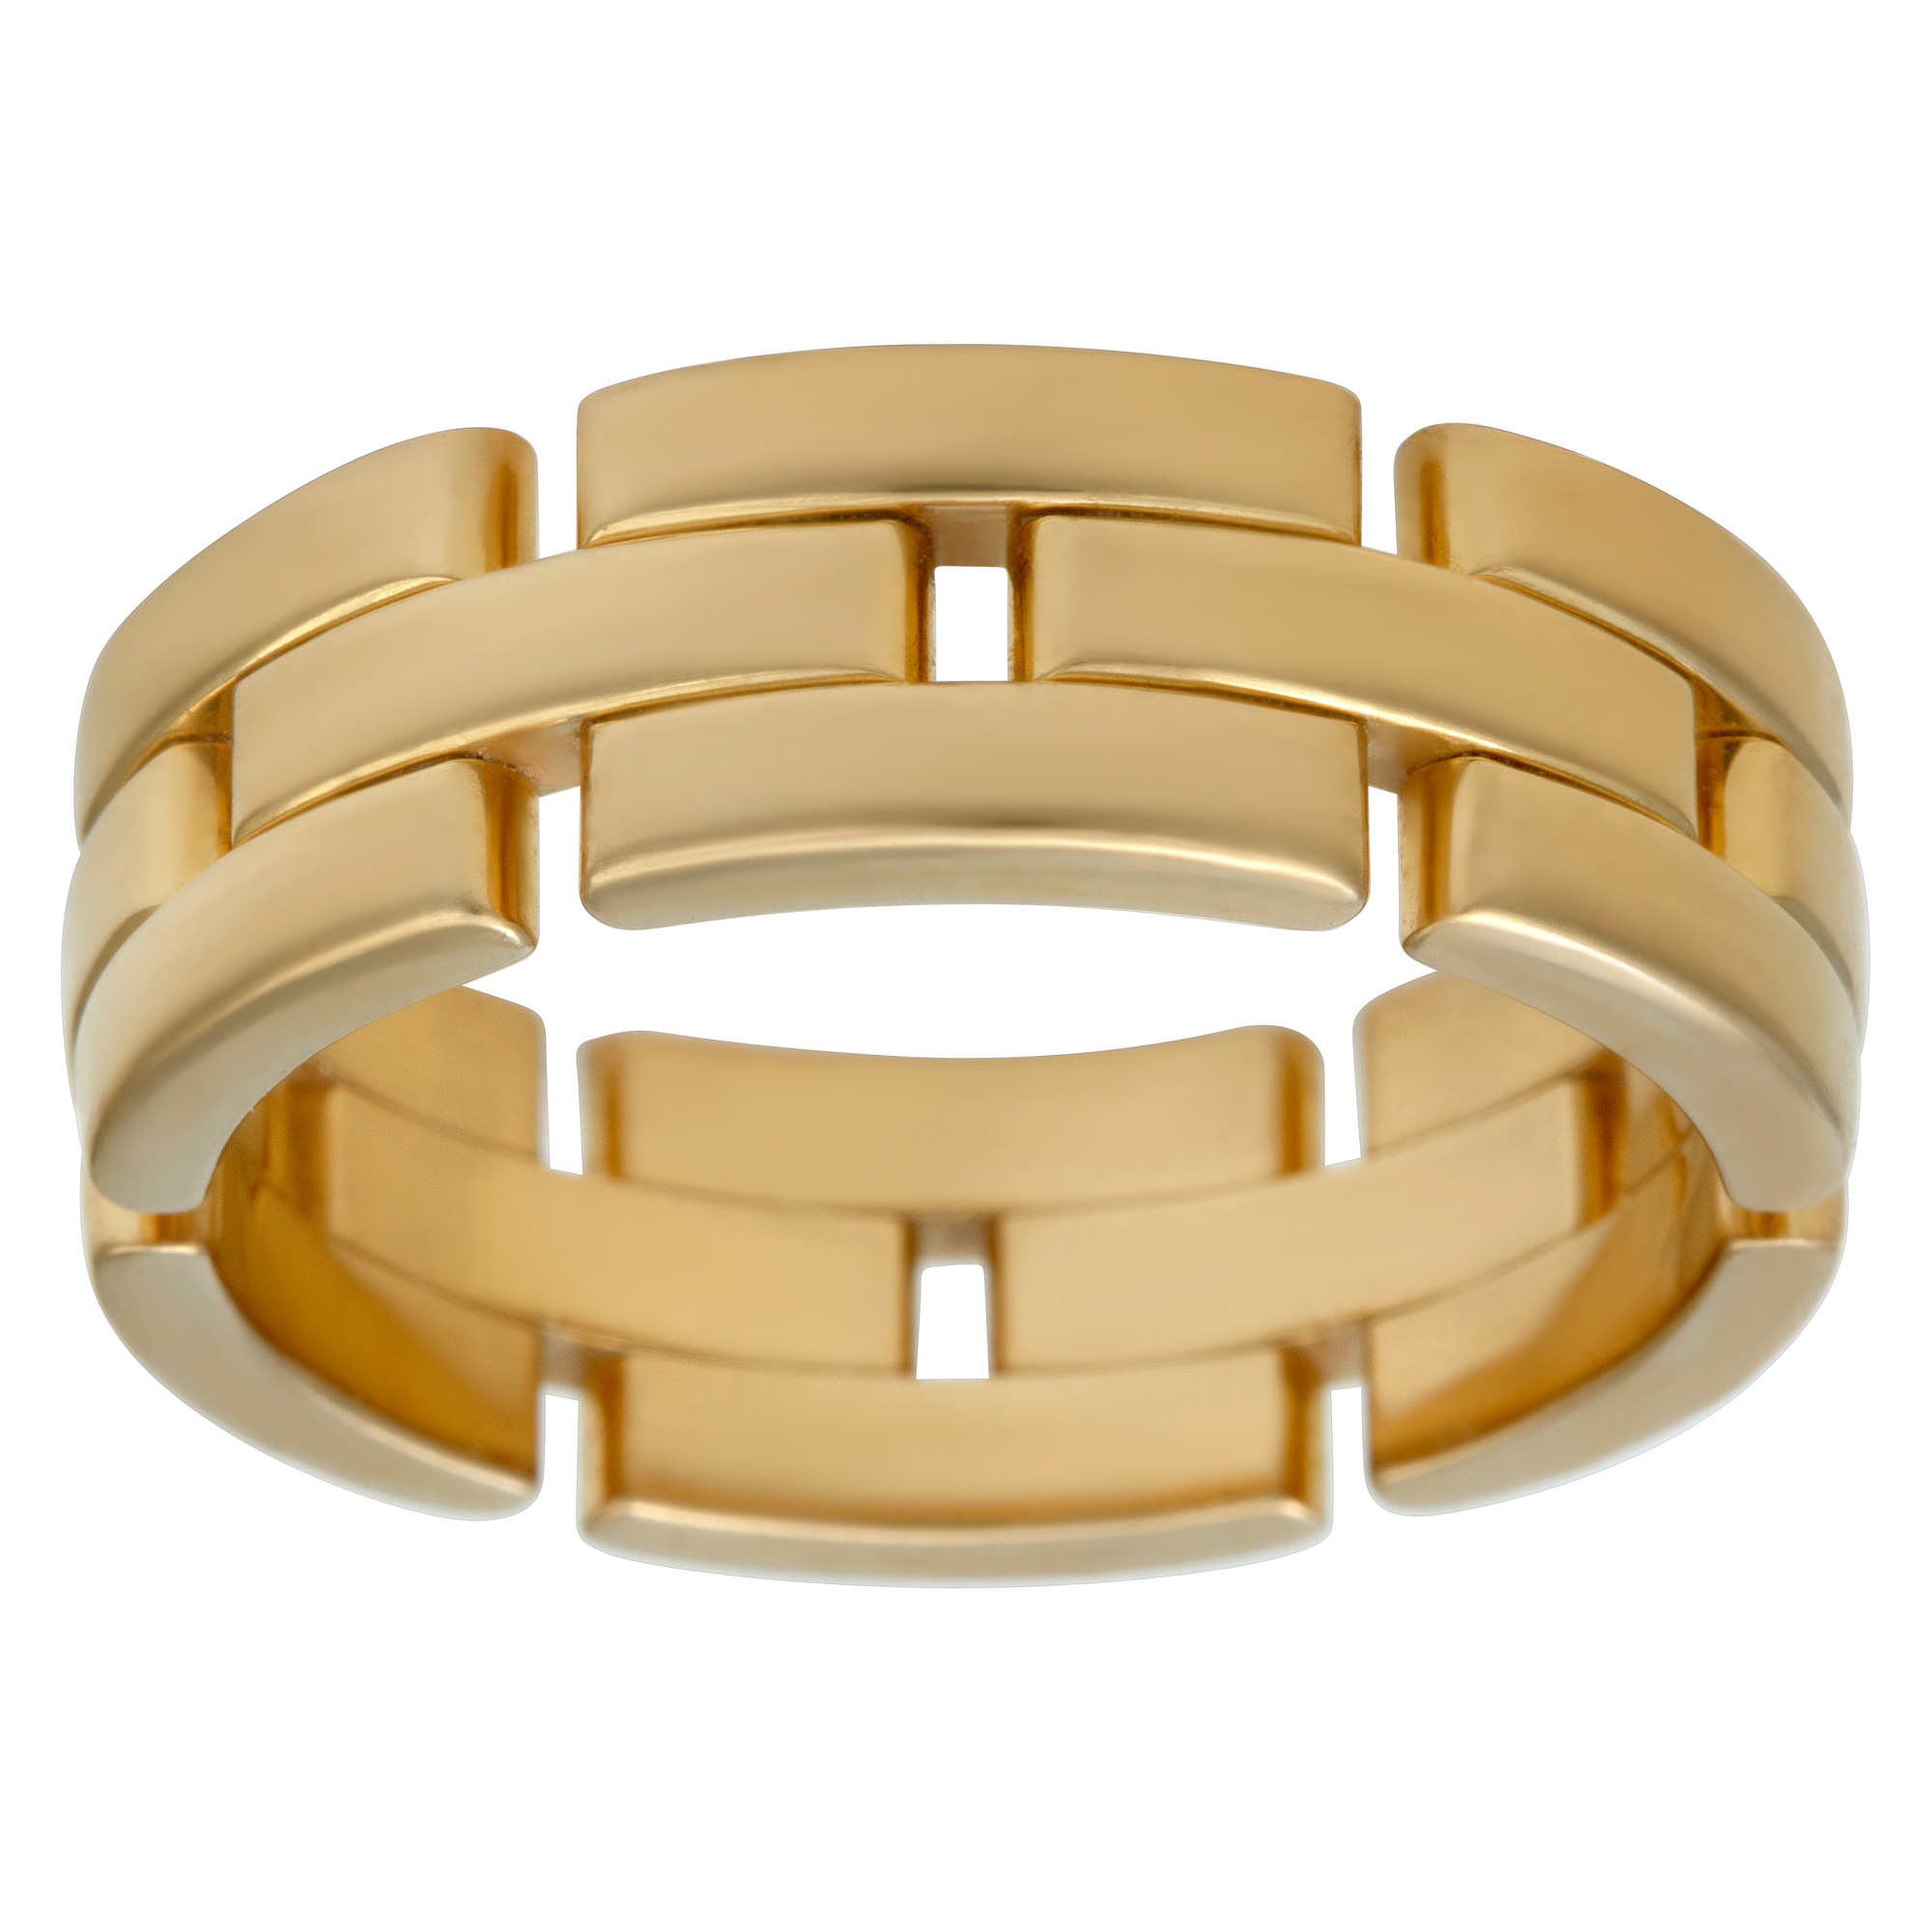 Cartier Maillon Panthere ring in 18k. Euro ring size 67 (US size 11.75)